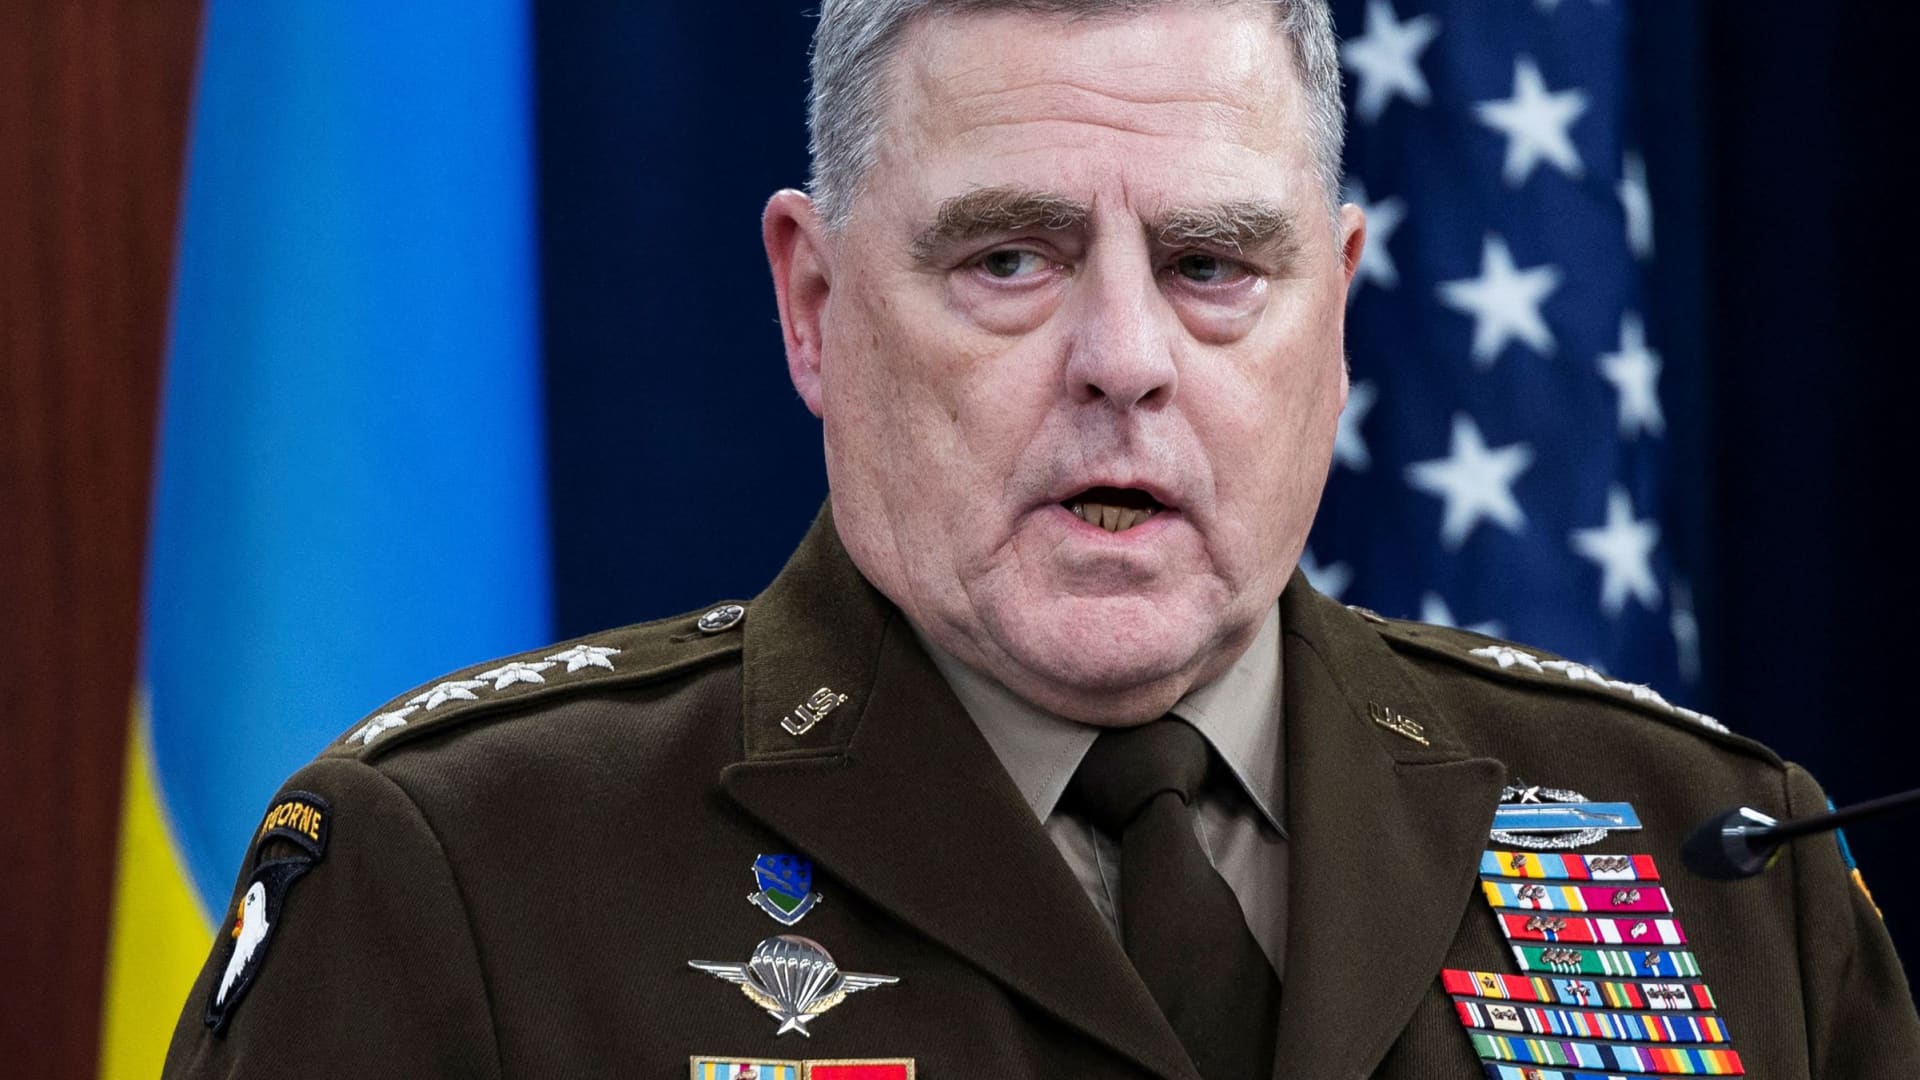 U.S. Joint Chiefs Chair Army General Mark Milley speaks during a news briefing after participating a virtual Ukraine Defense Contact Group meeting at the Pentagon in Arlington, Virginia, November 16, 2022.